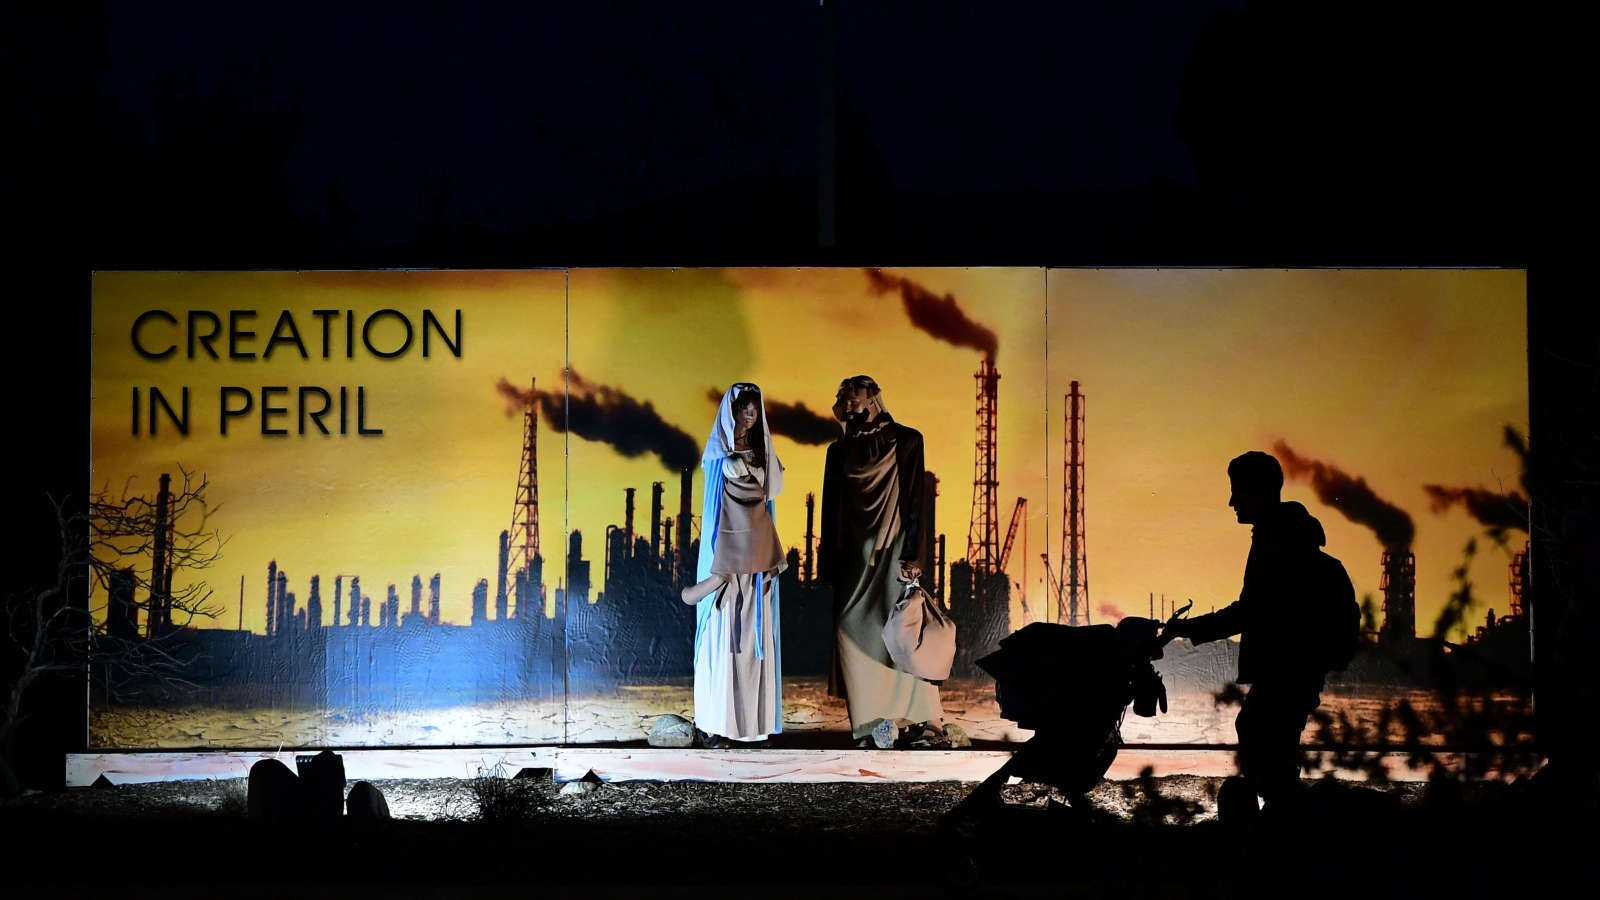 A nativity scene in front of a sign showing pollution and saying 